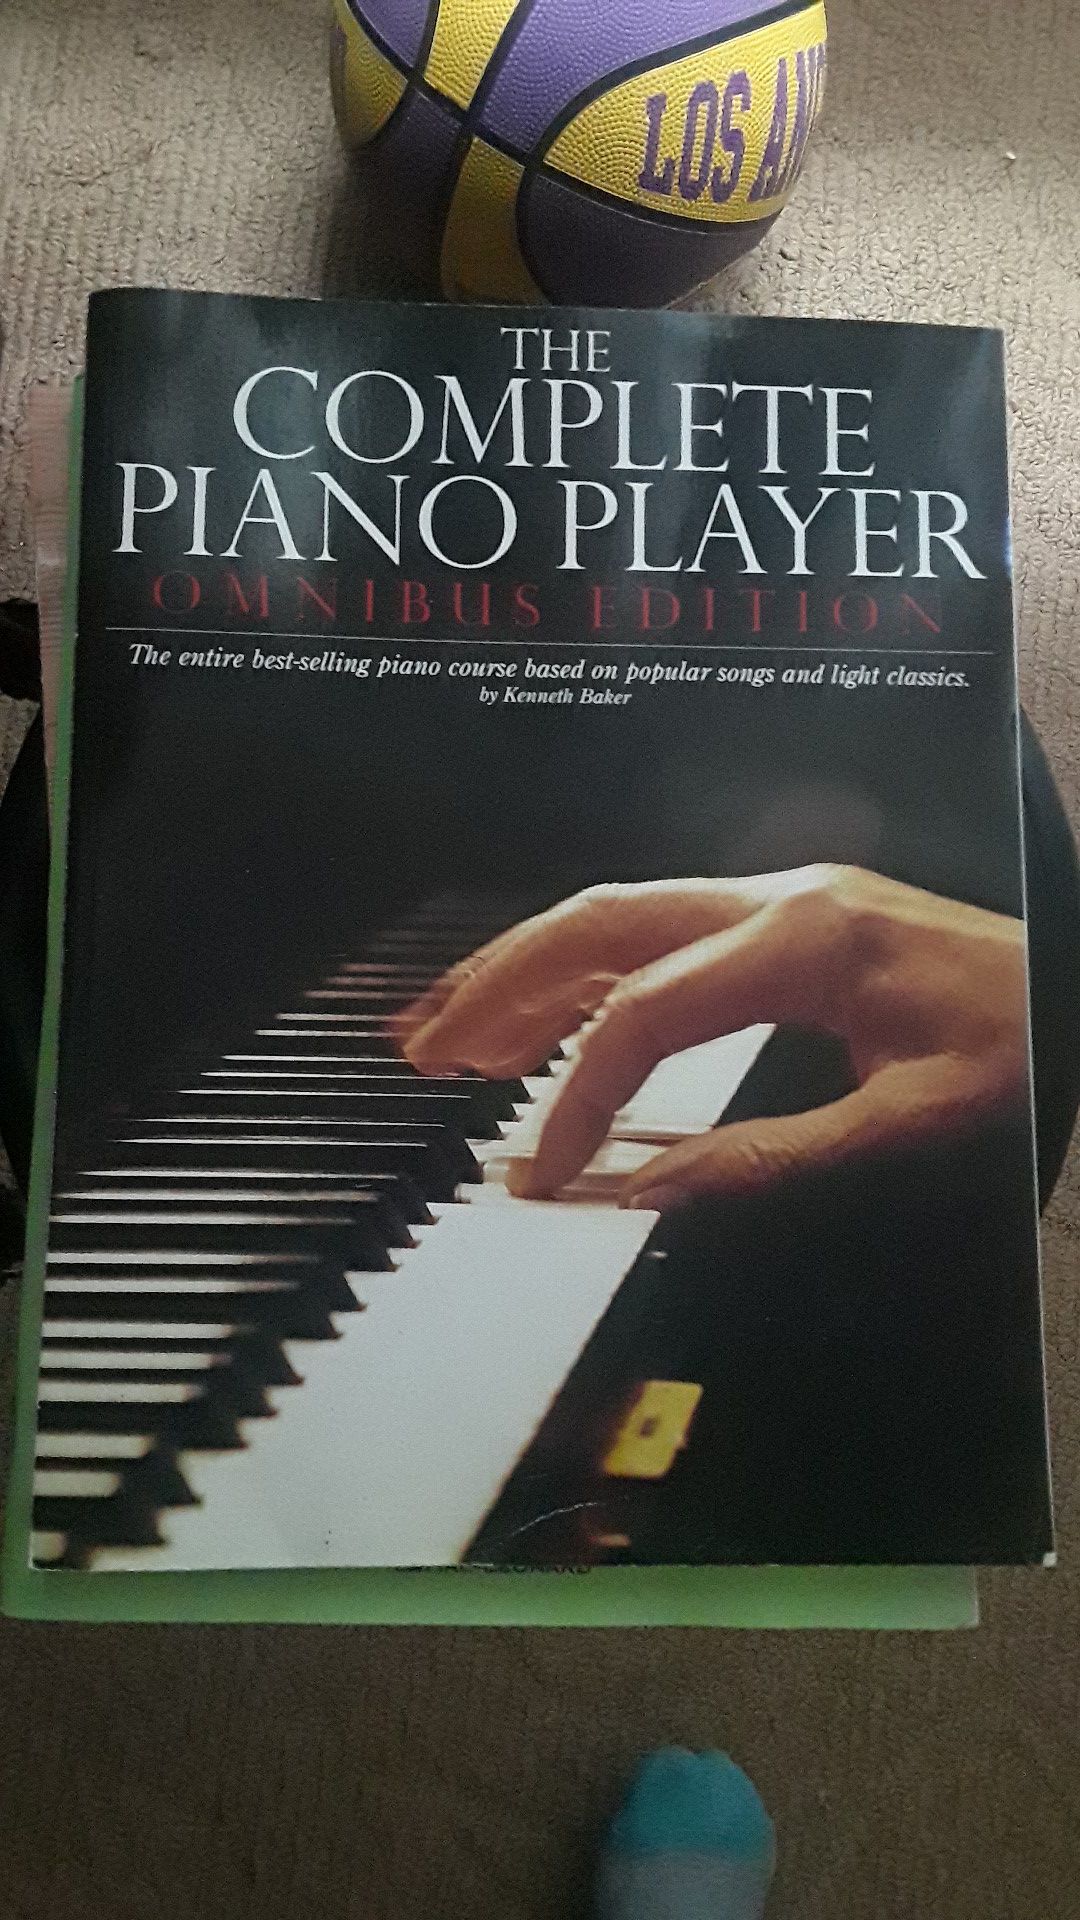 The complete piano player omnibus edition by: Kenneth Baker